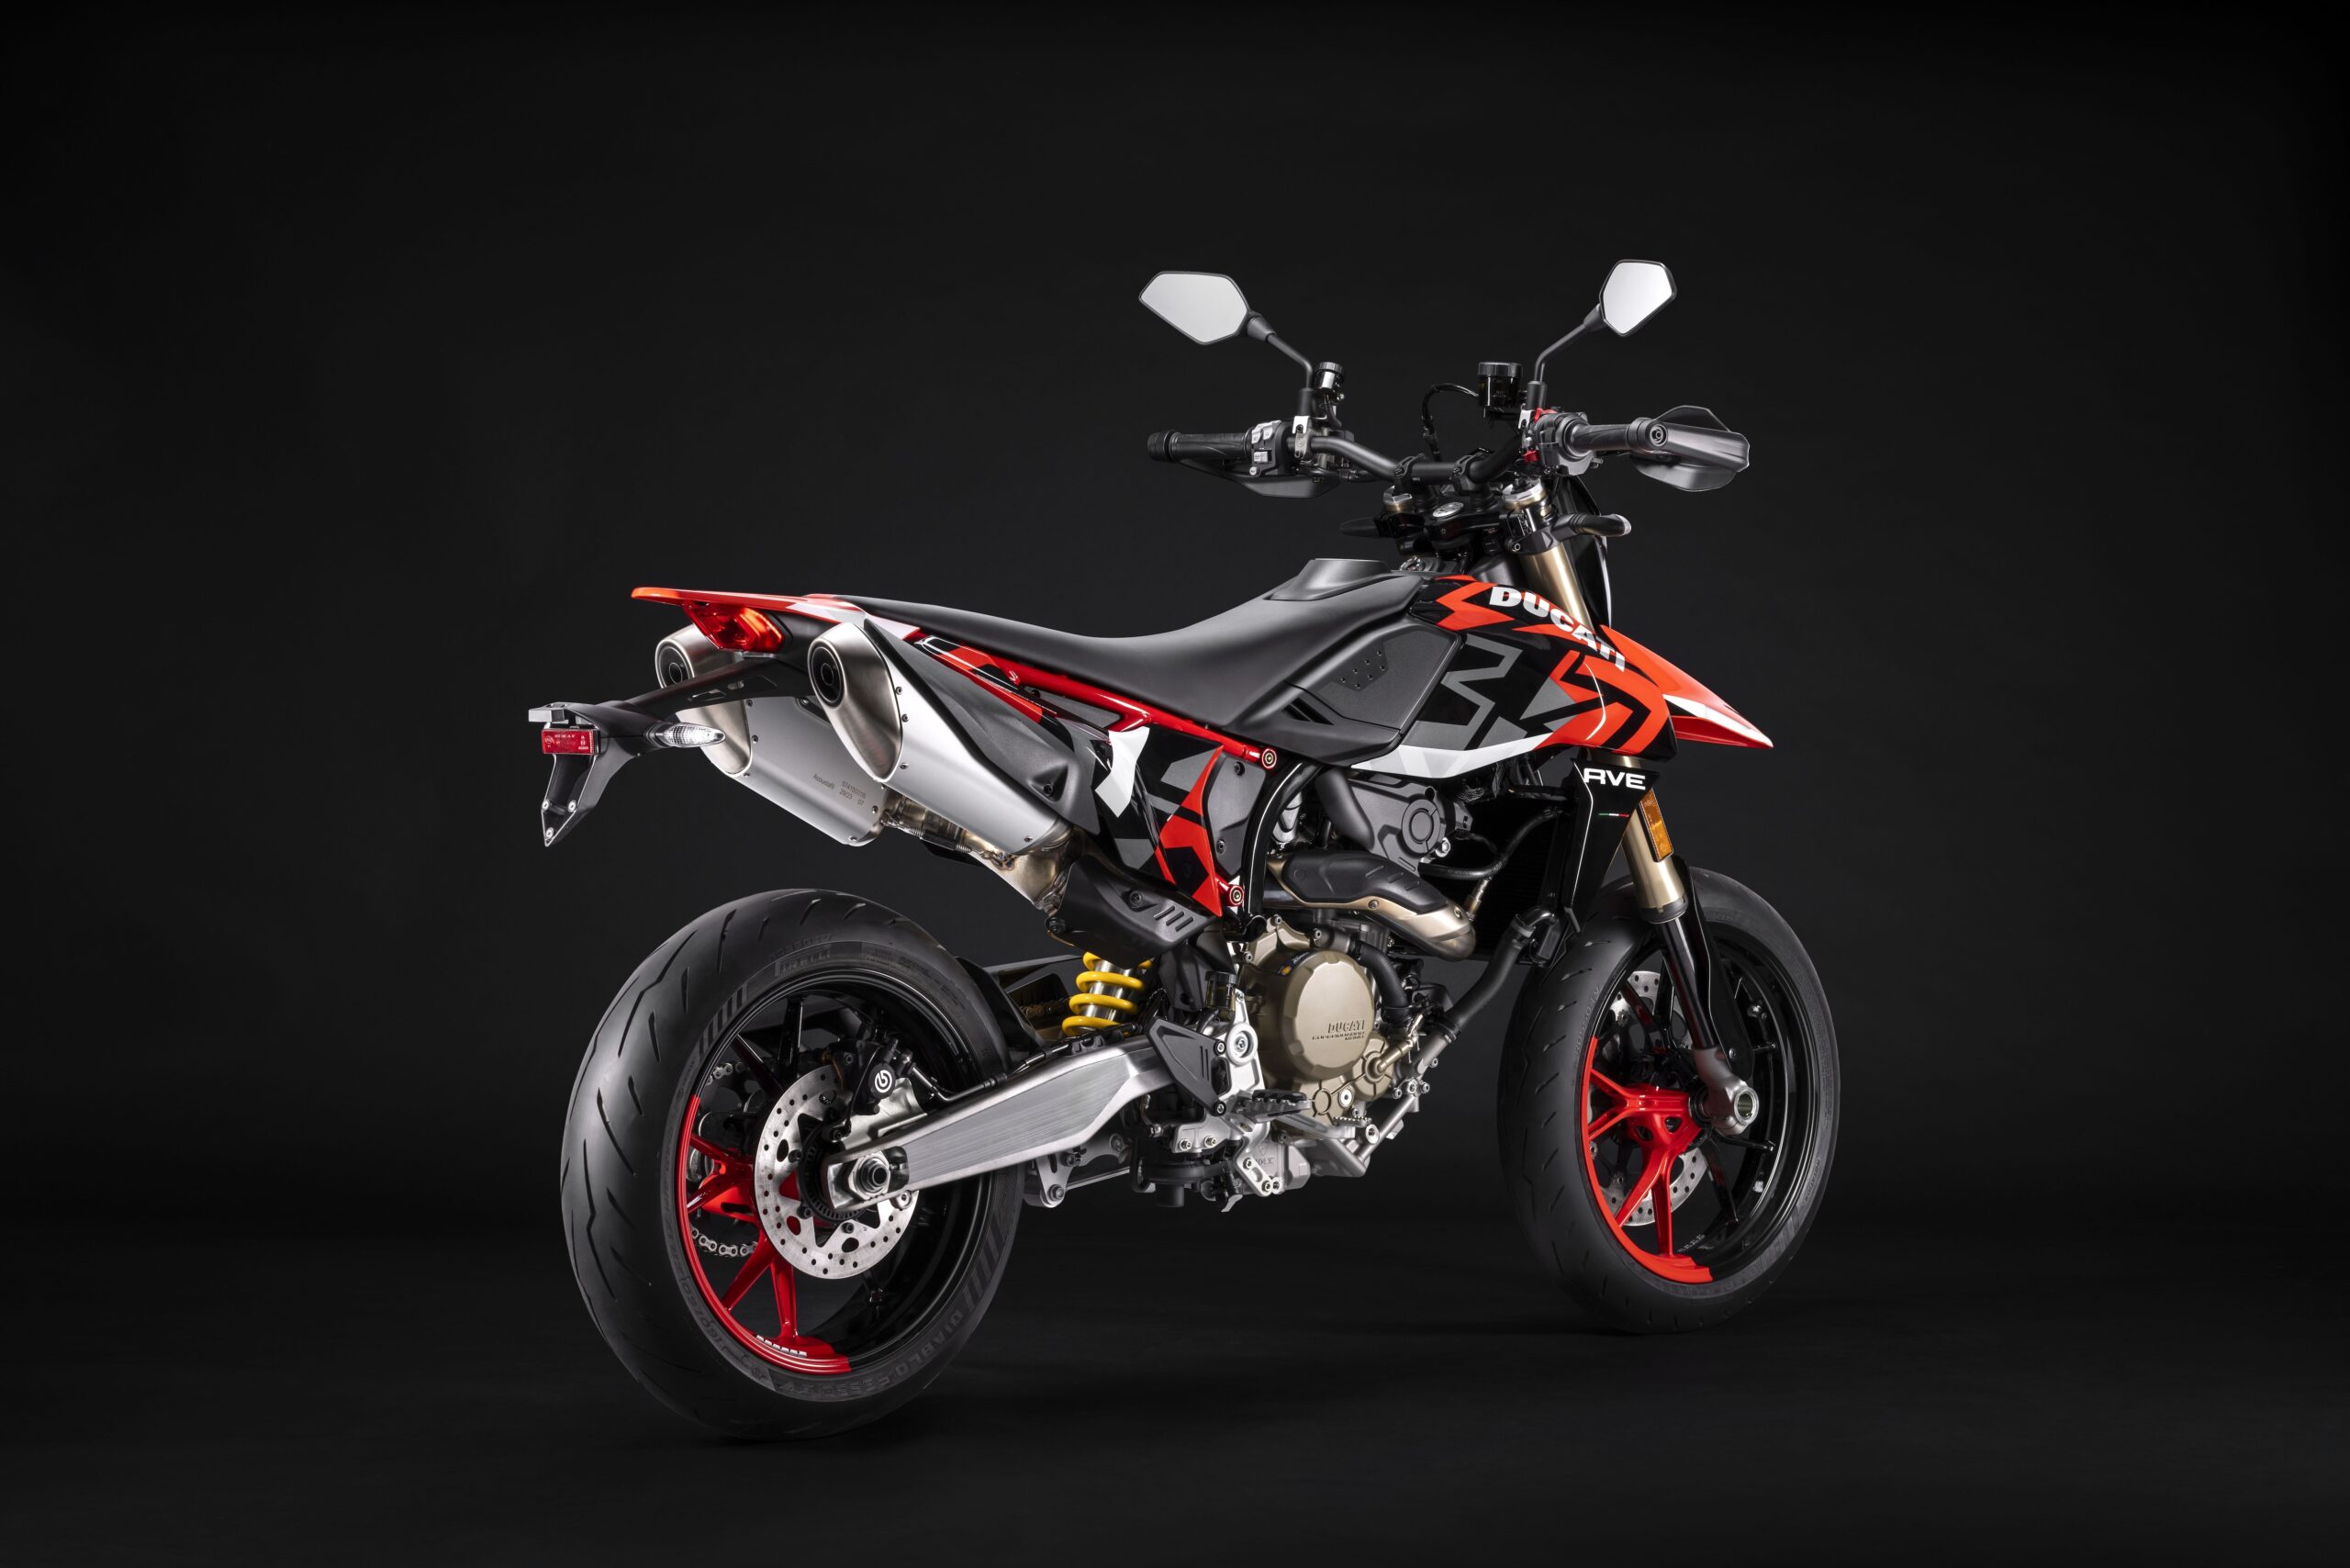 Ducati Hypermotard 698 Mono Is Here - Single Cylinder Madness! (1)